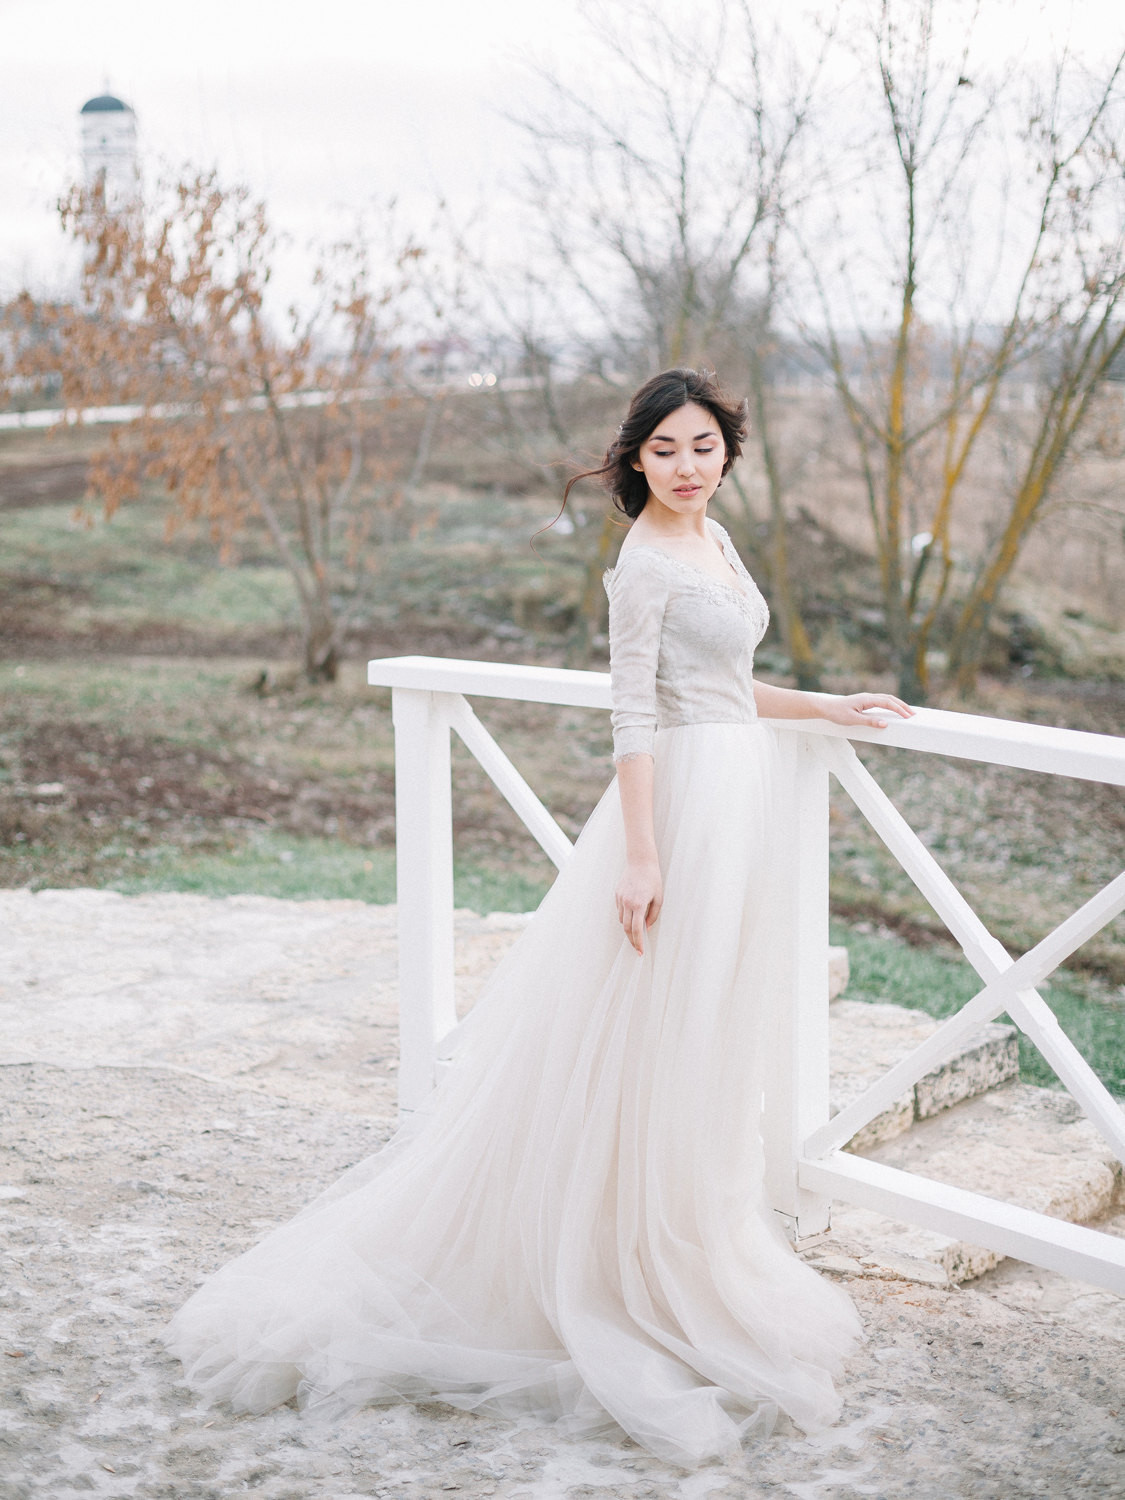 Ethereal Wedding Gowns
 20 Romantic Ethereal Wedding Dresses